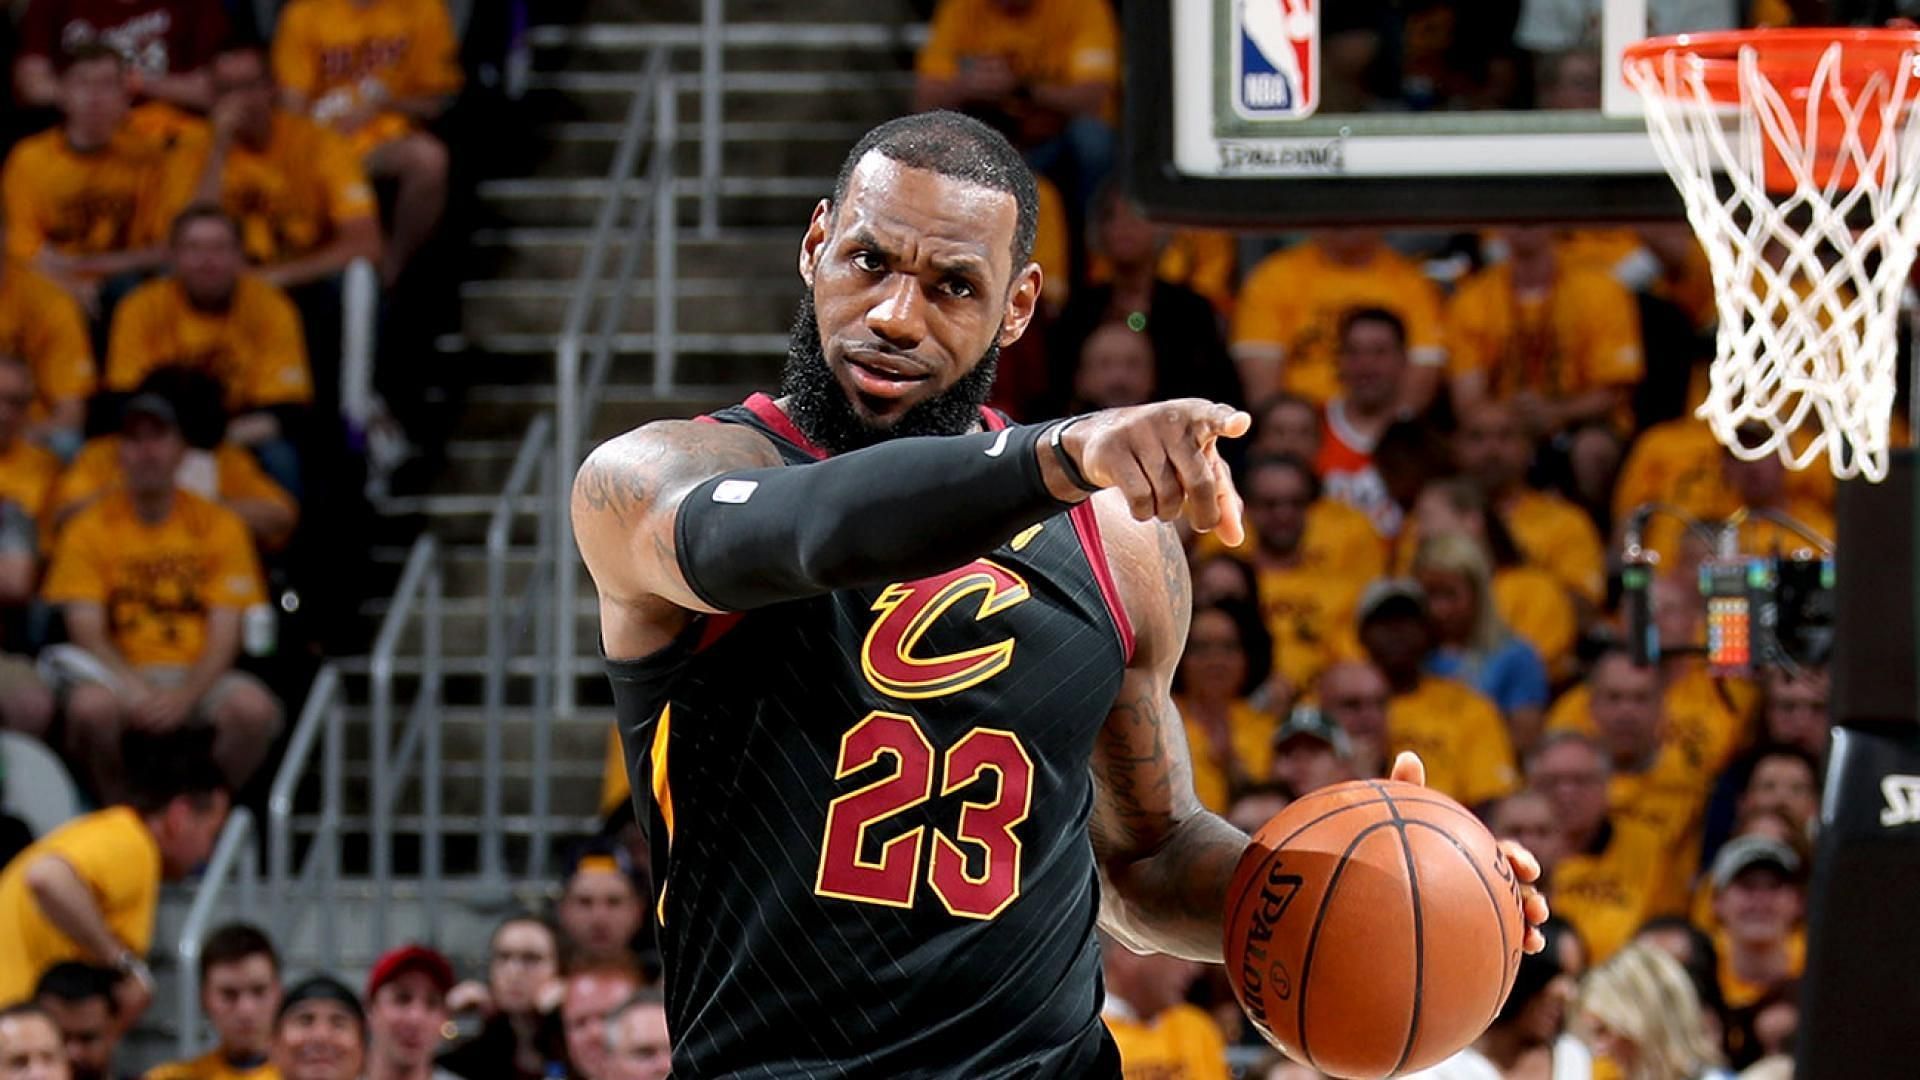 LeBron James was furious after losing Game 1 of the 2018 NBA Finals. [Photo: NBA.com]